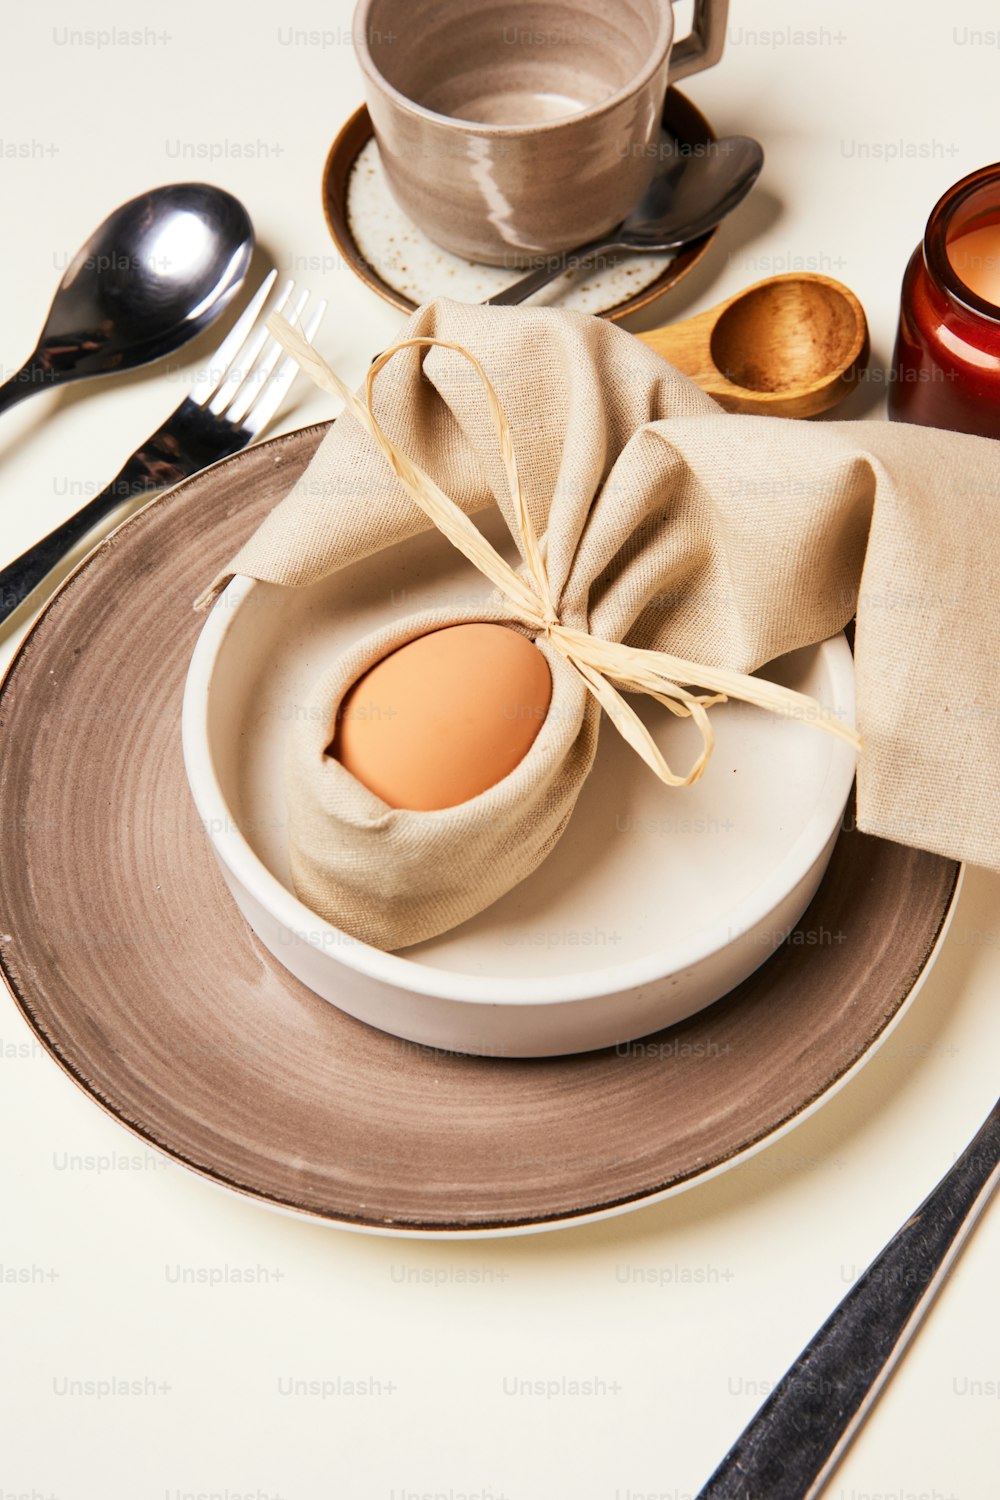 a plate with an egg on it and a napkin tied around it